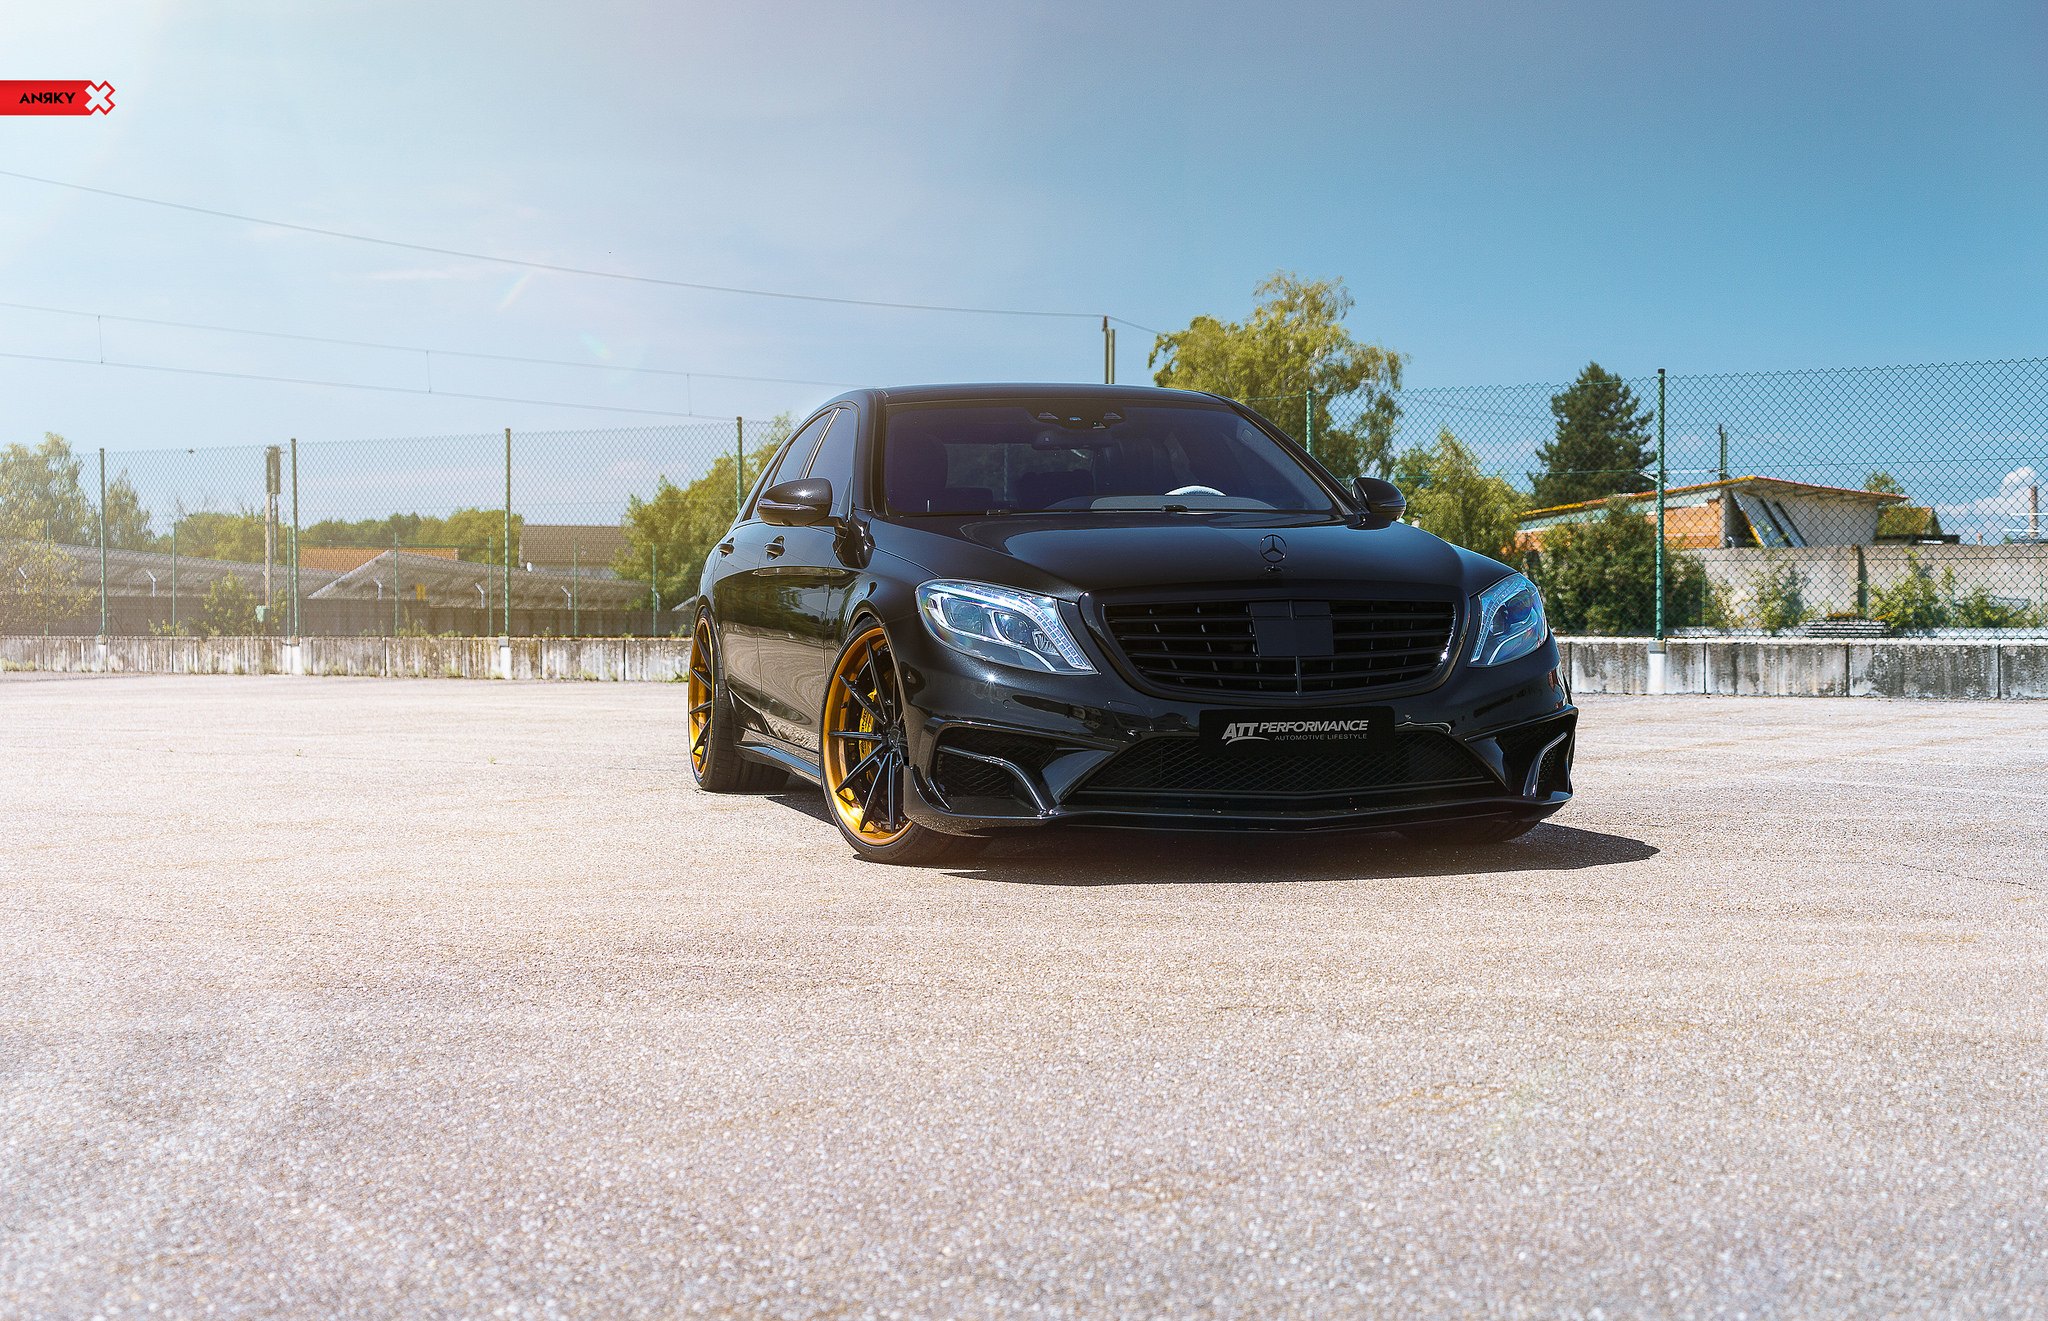 Black Mercedes S Class with Aftermarket Front Bumper - Photo by Anrky Wheels